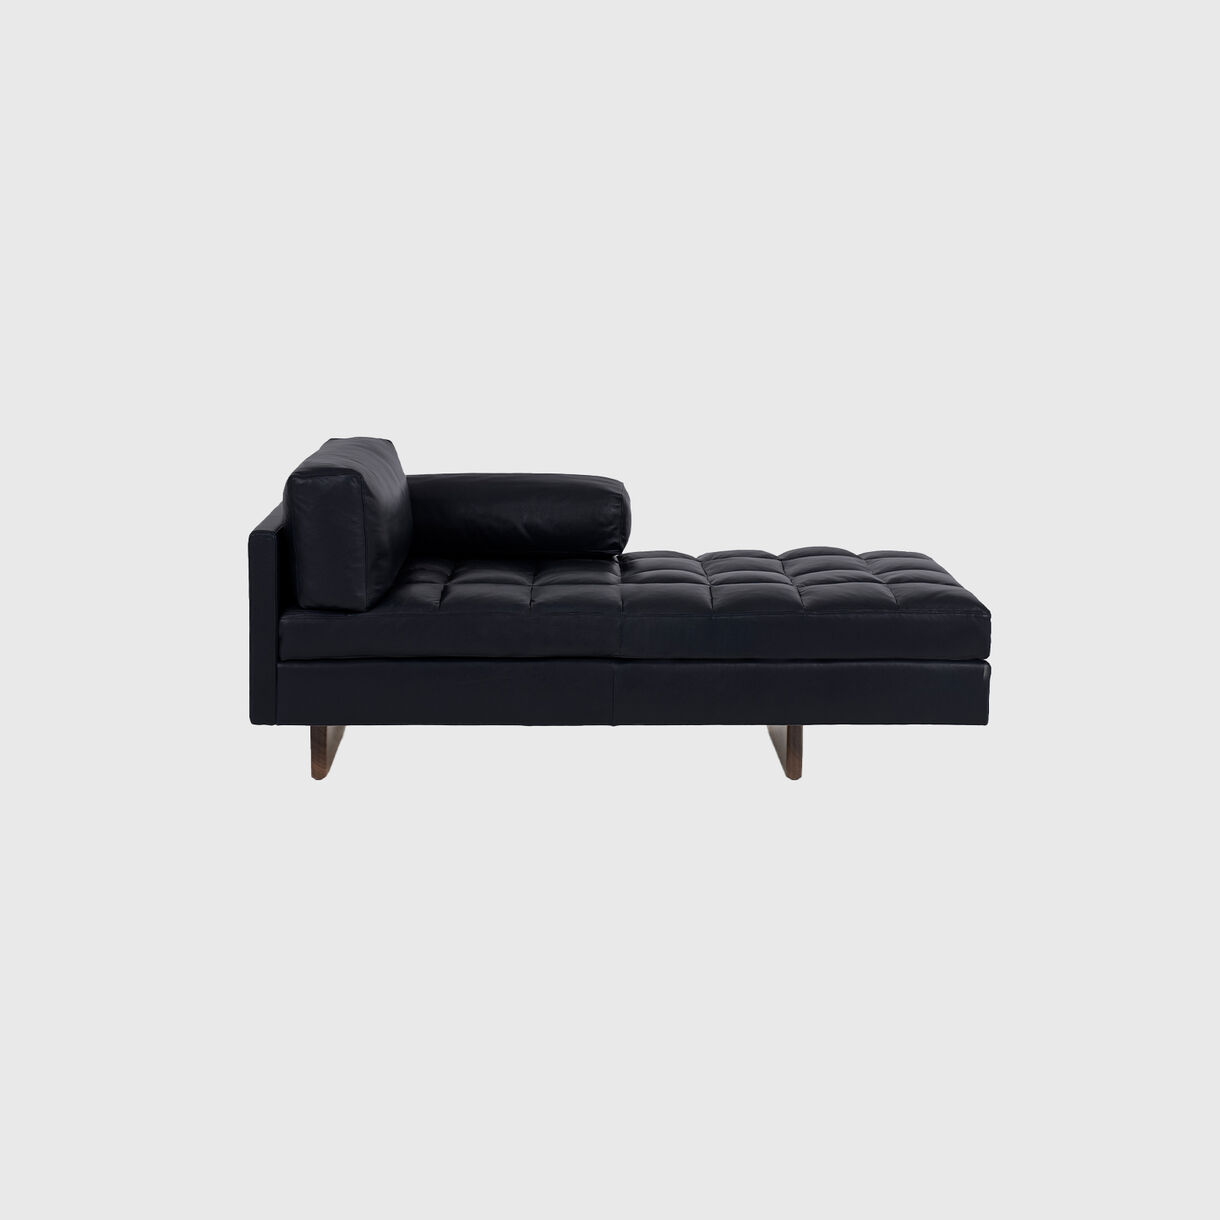 Asymmetric Chaise Lounge, Leather